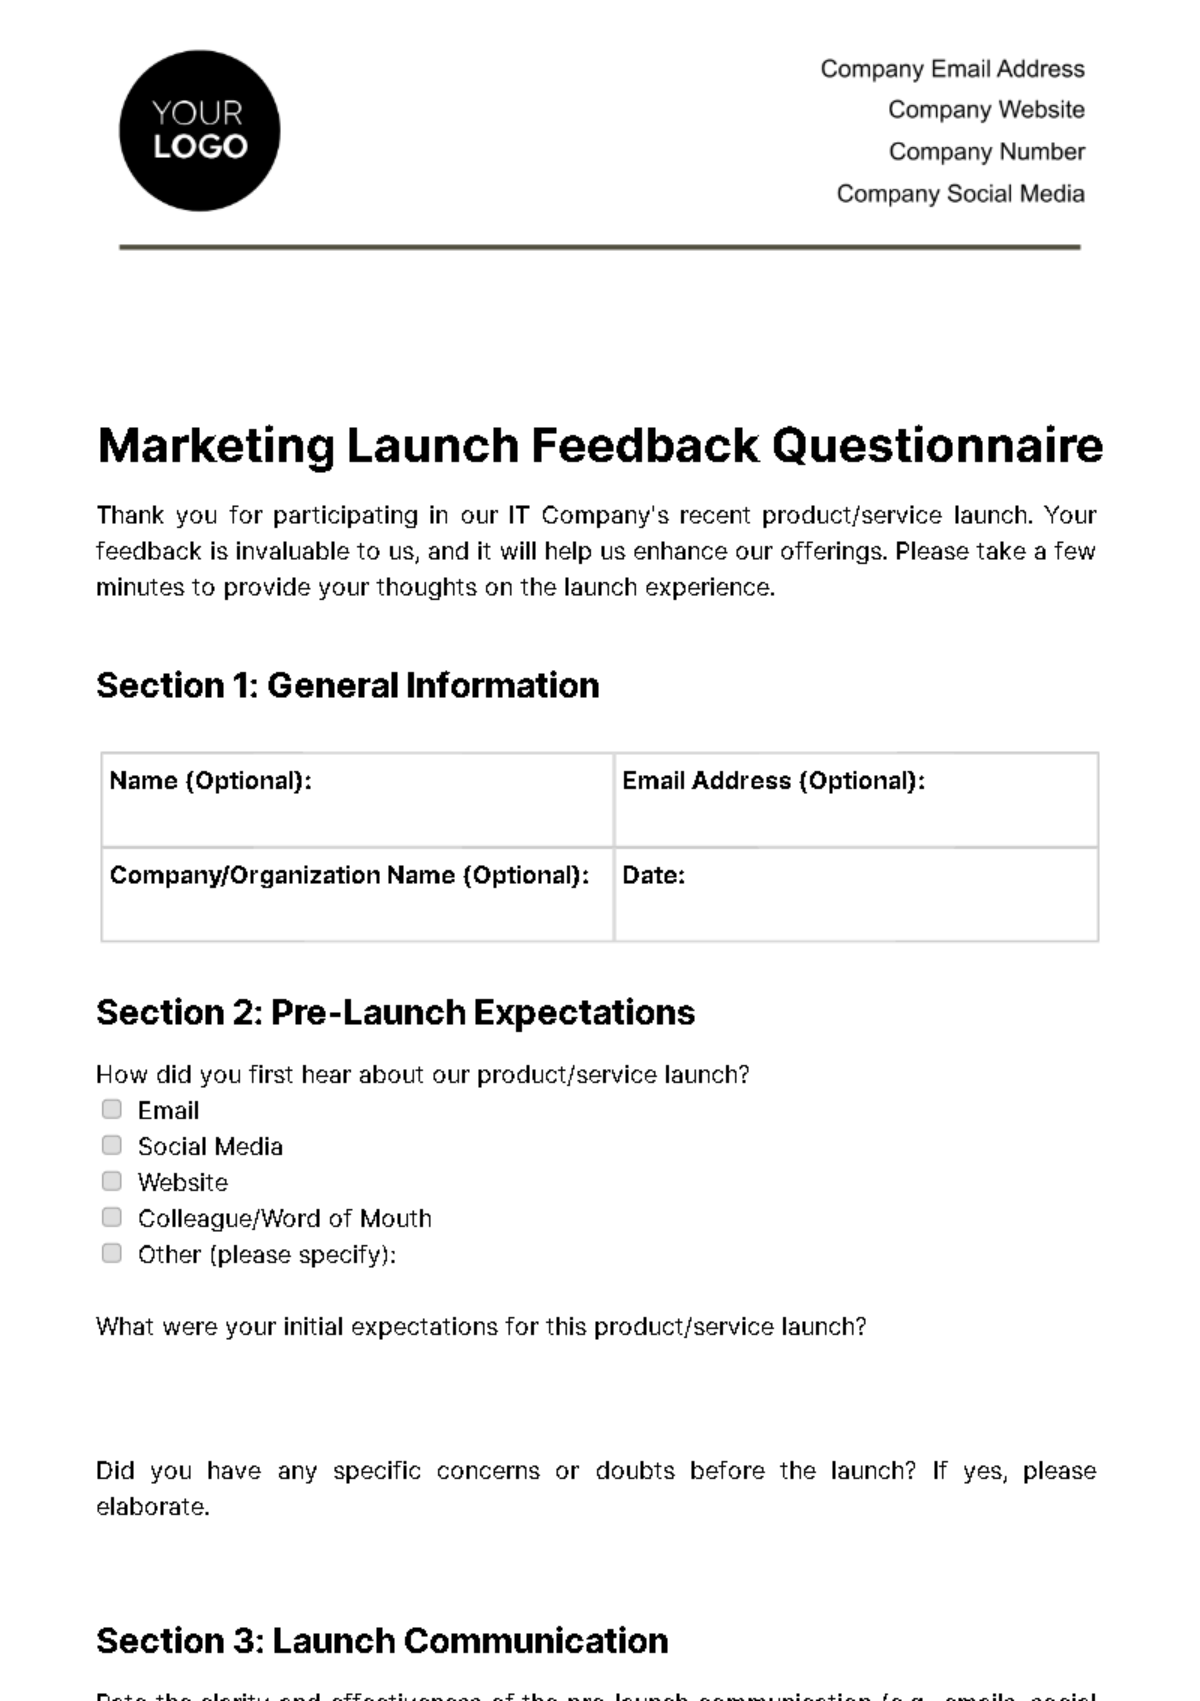 Free Marketing Launch Feedback Questionnaire Template